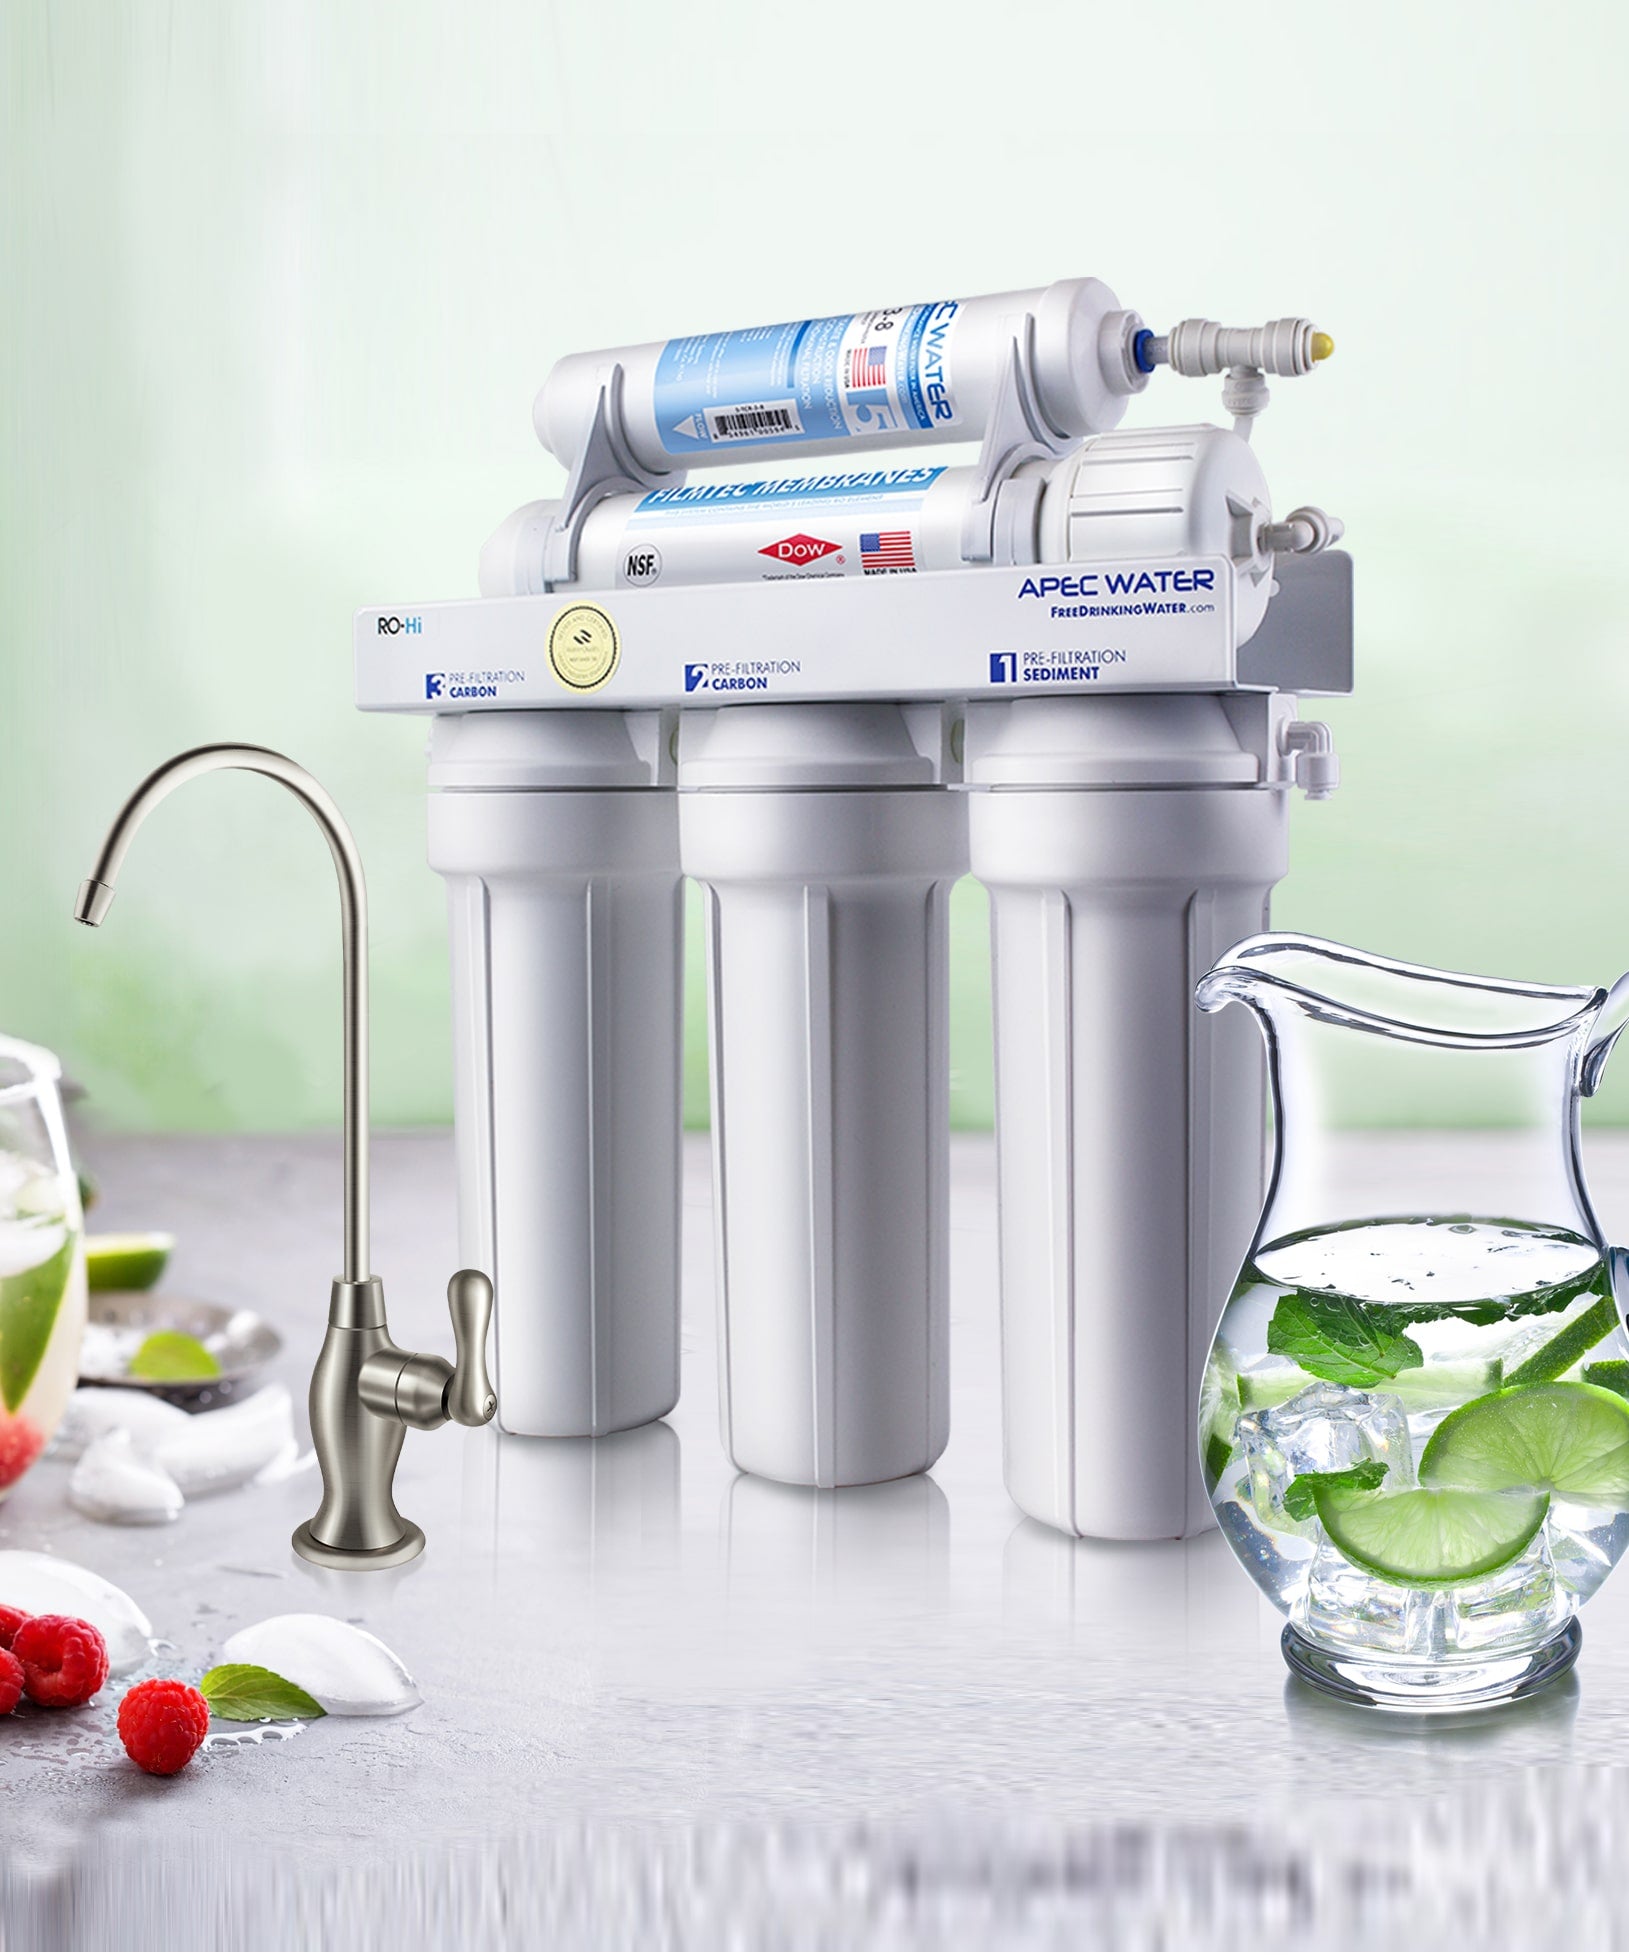 APEC Water reverse osmosis water filter collection